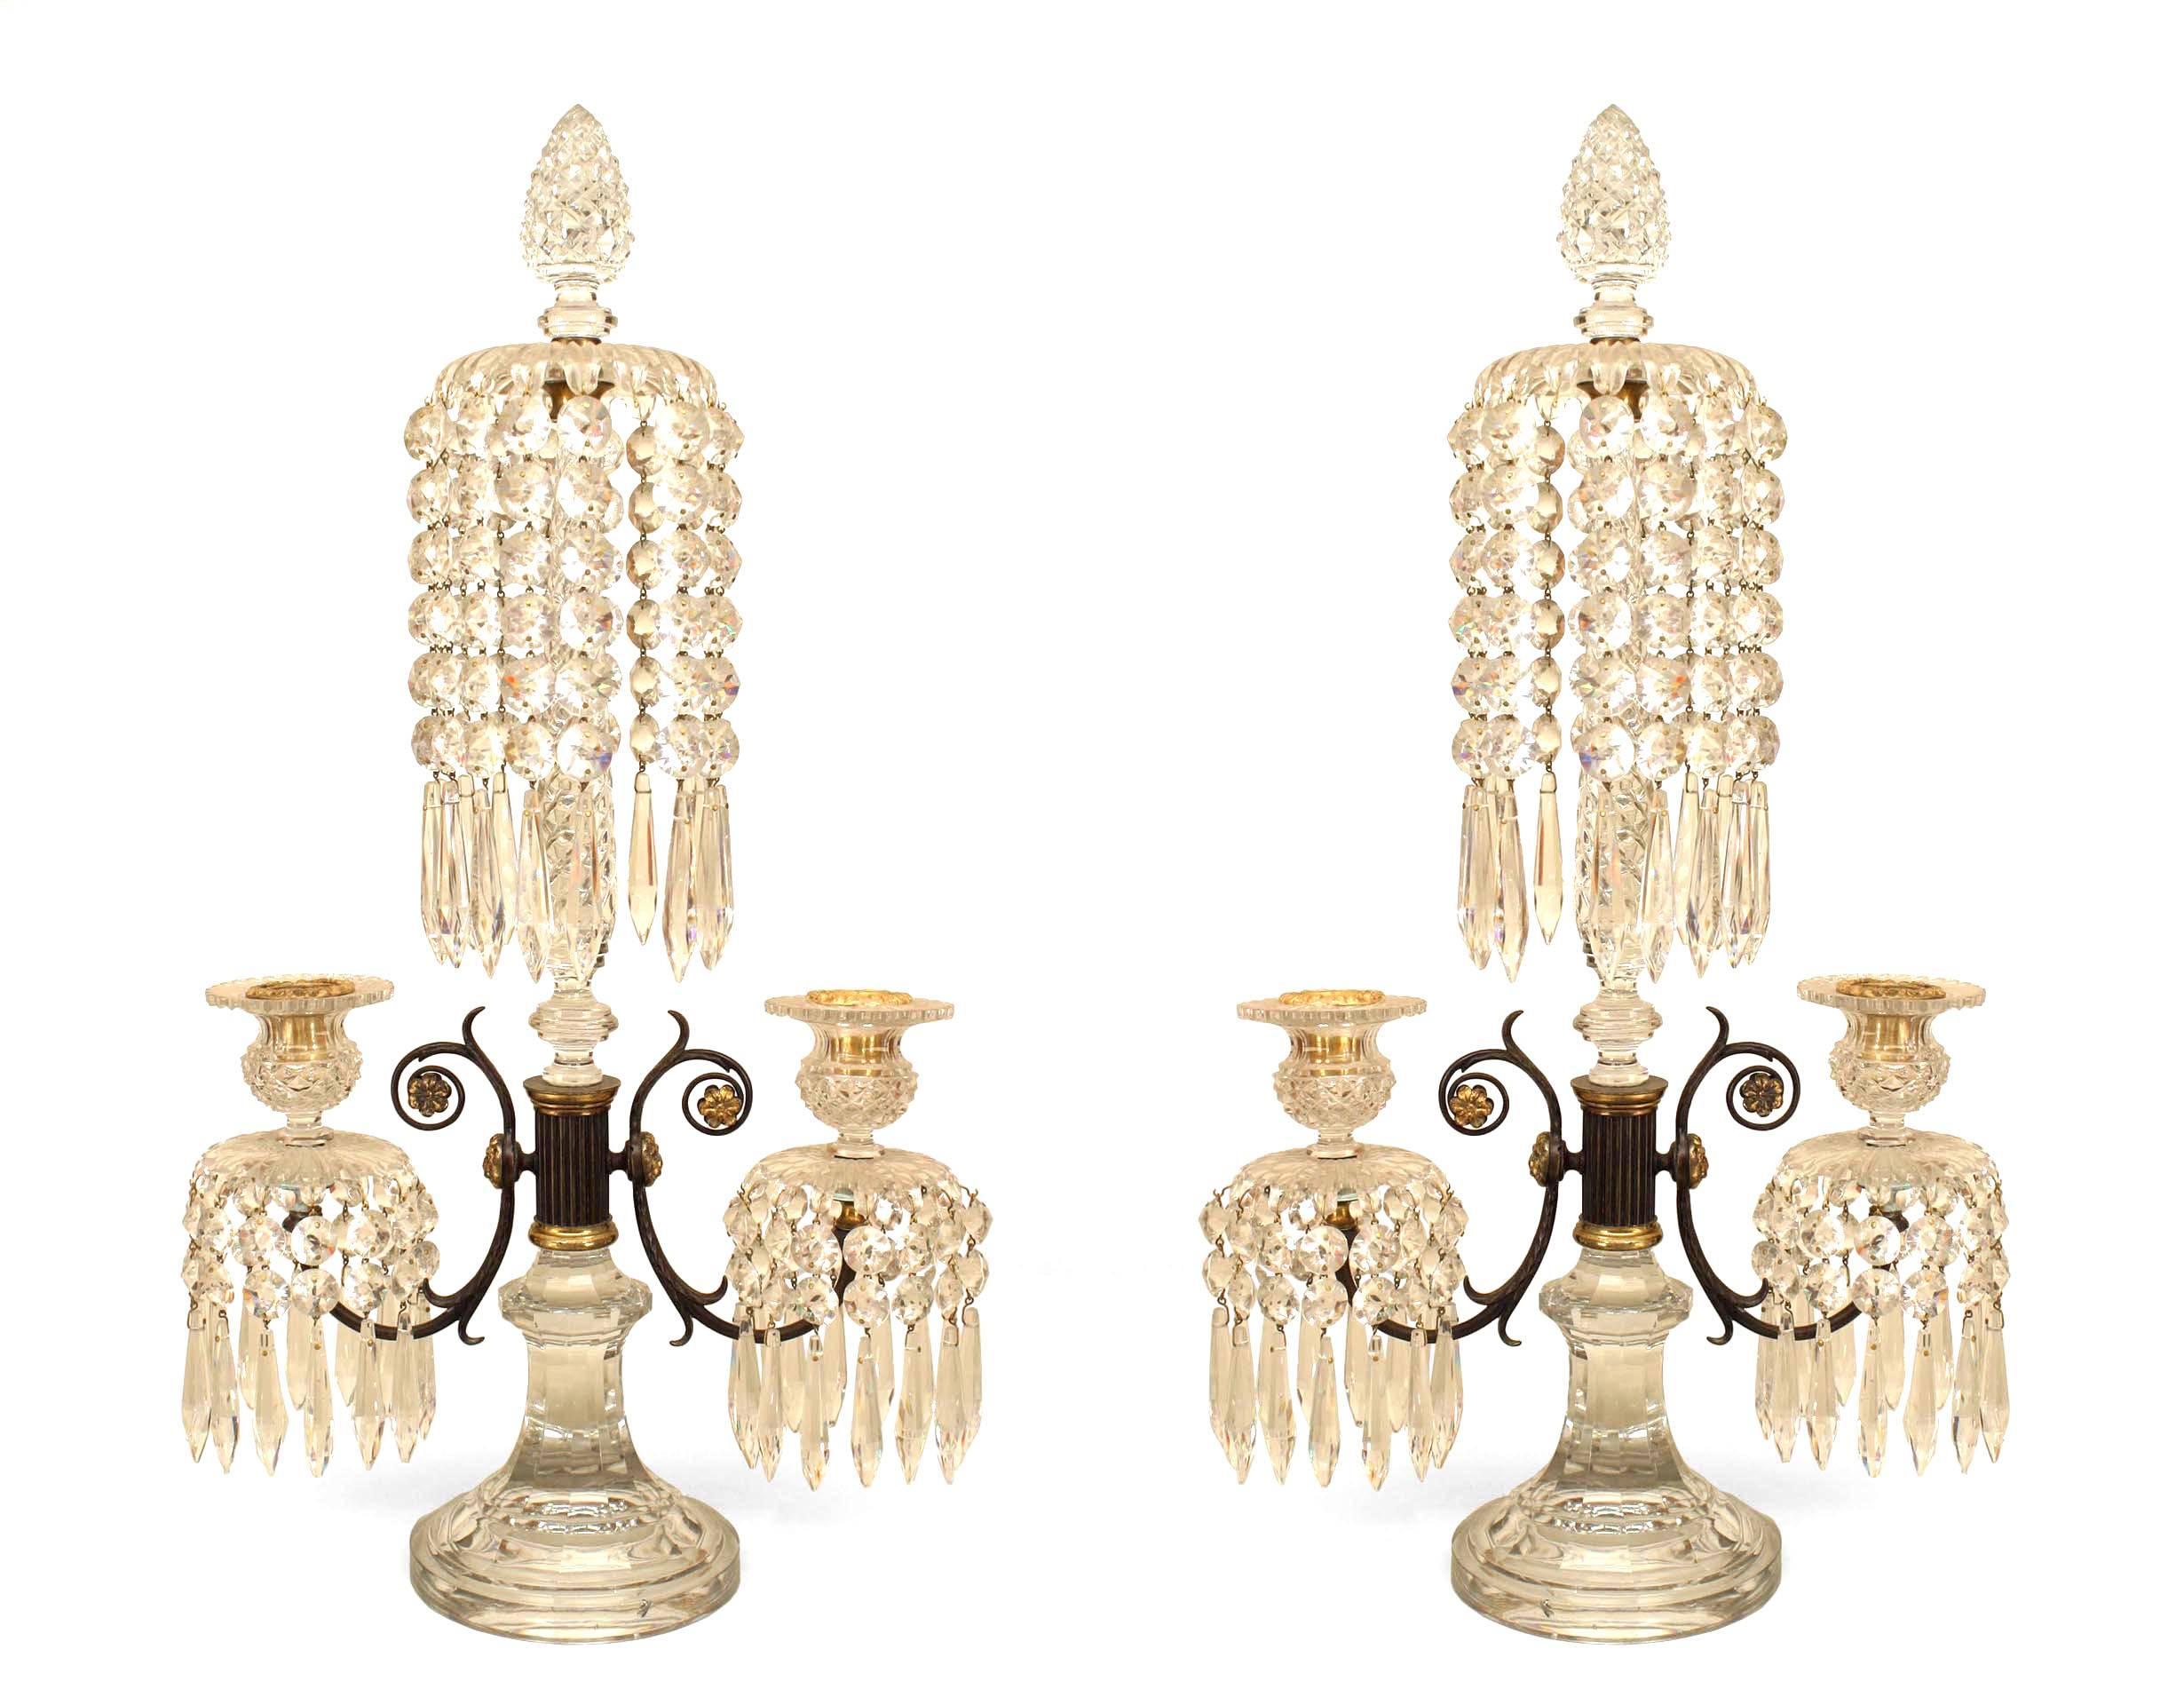 Pair of English Regency Waterford candelabras with a pine cone finial above a swirl center post and 2 arms emanating from a metal and brass centerpost having crystal drops (PRICED AS Pair)
